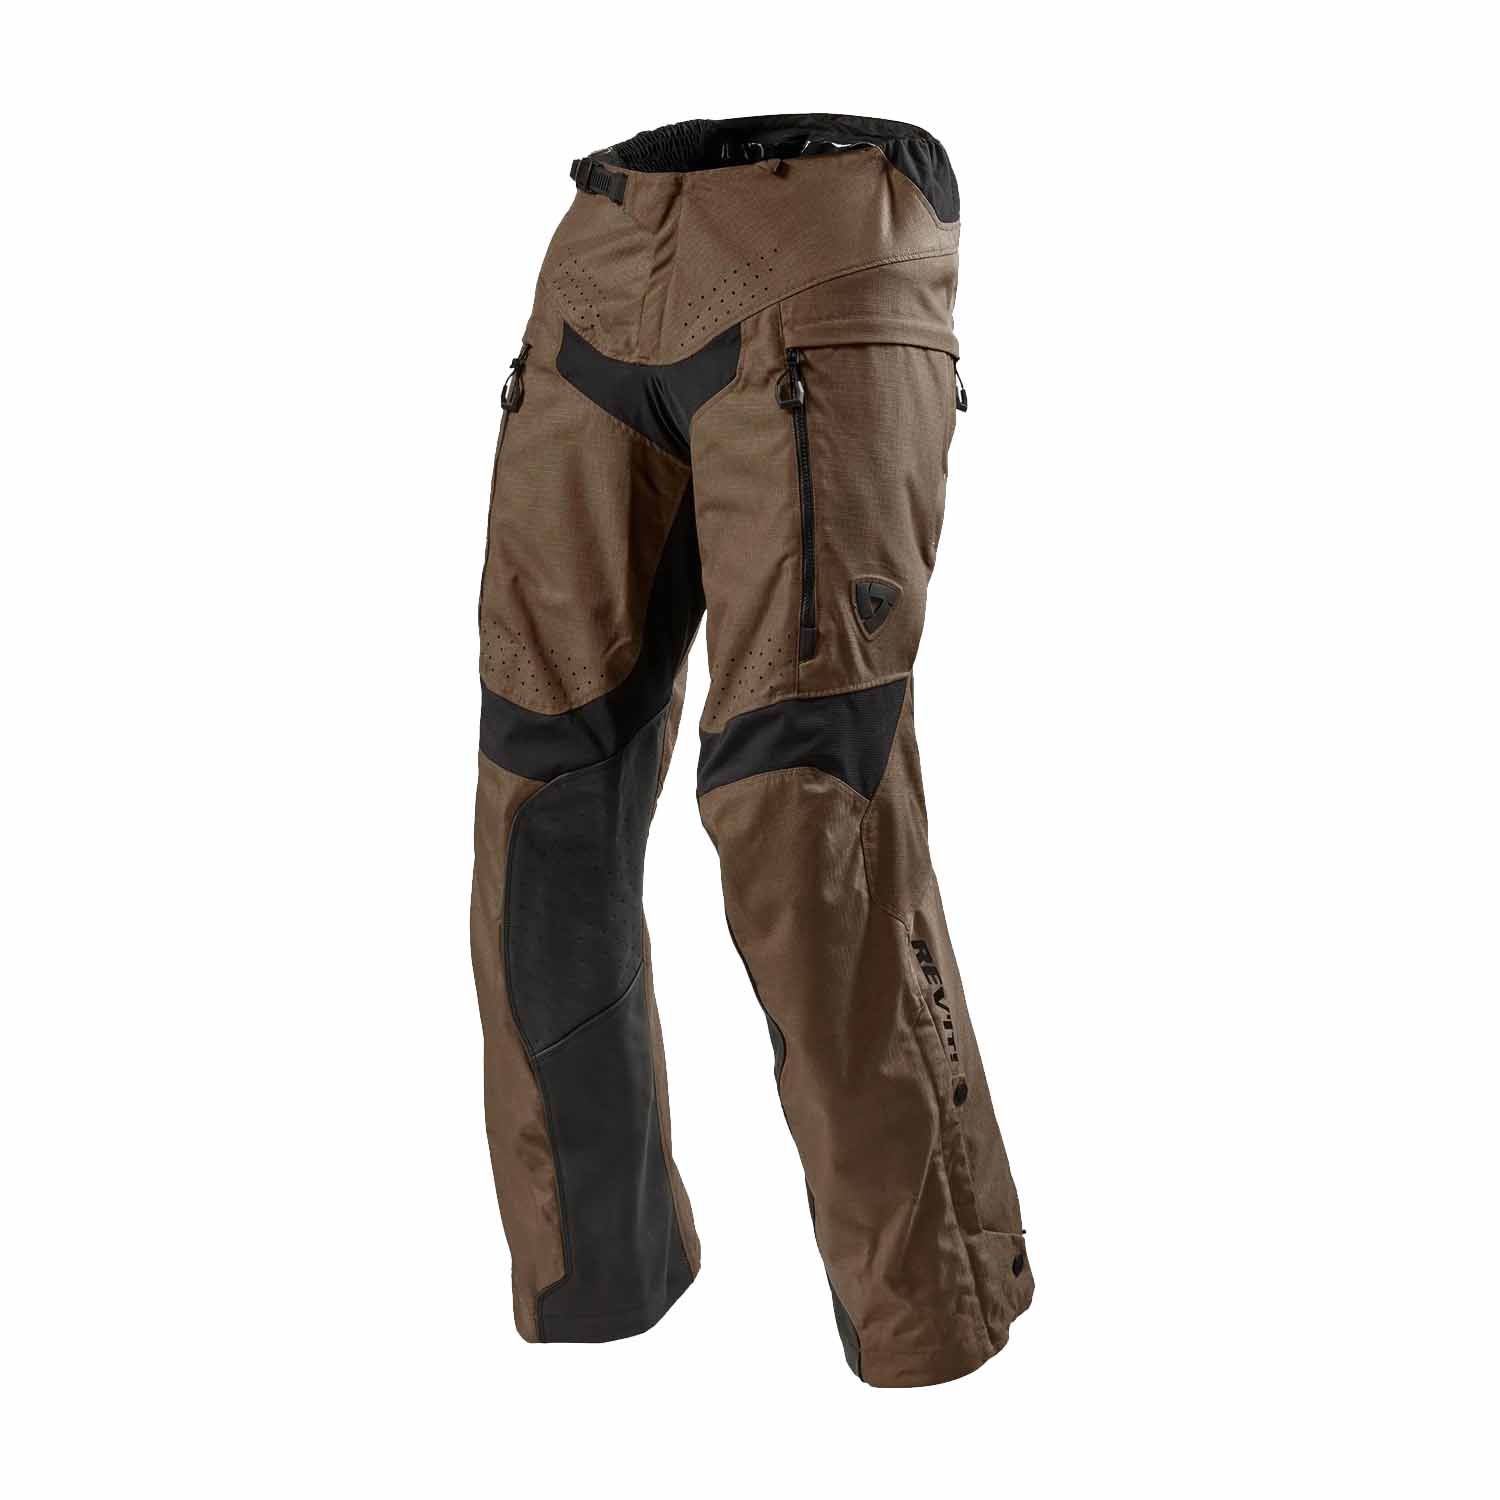 Image of EU REV'IT! Continent Pants Brown Standard Motorcycle Pants Taille S